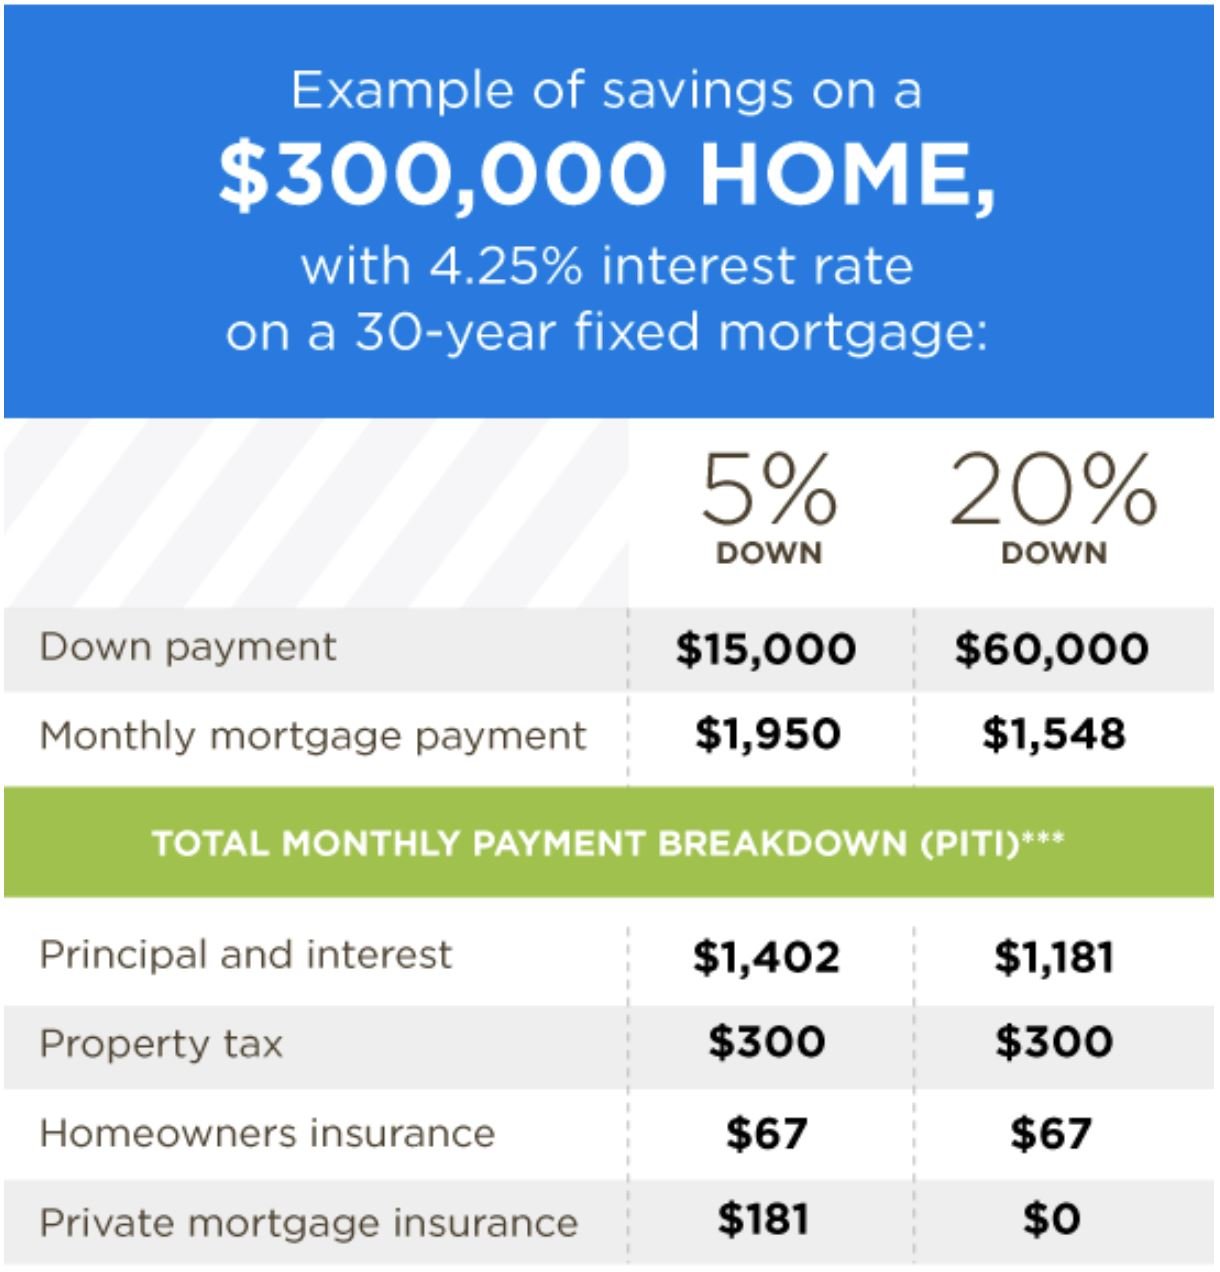 How Much Is a Down Payment on a House?